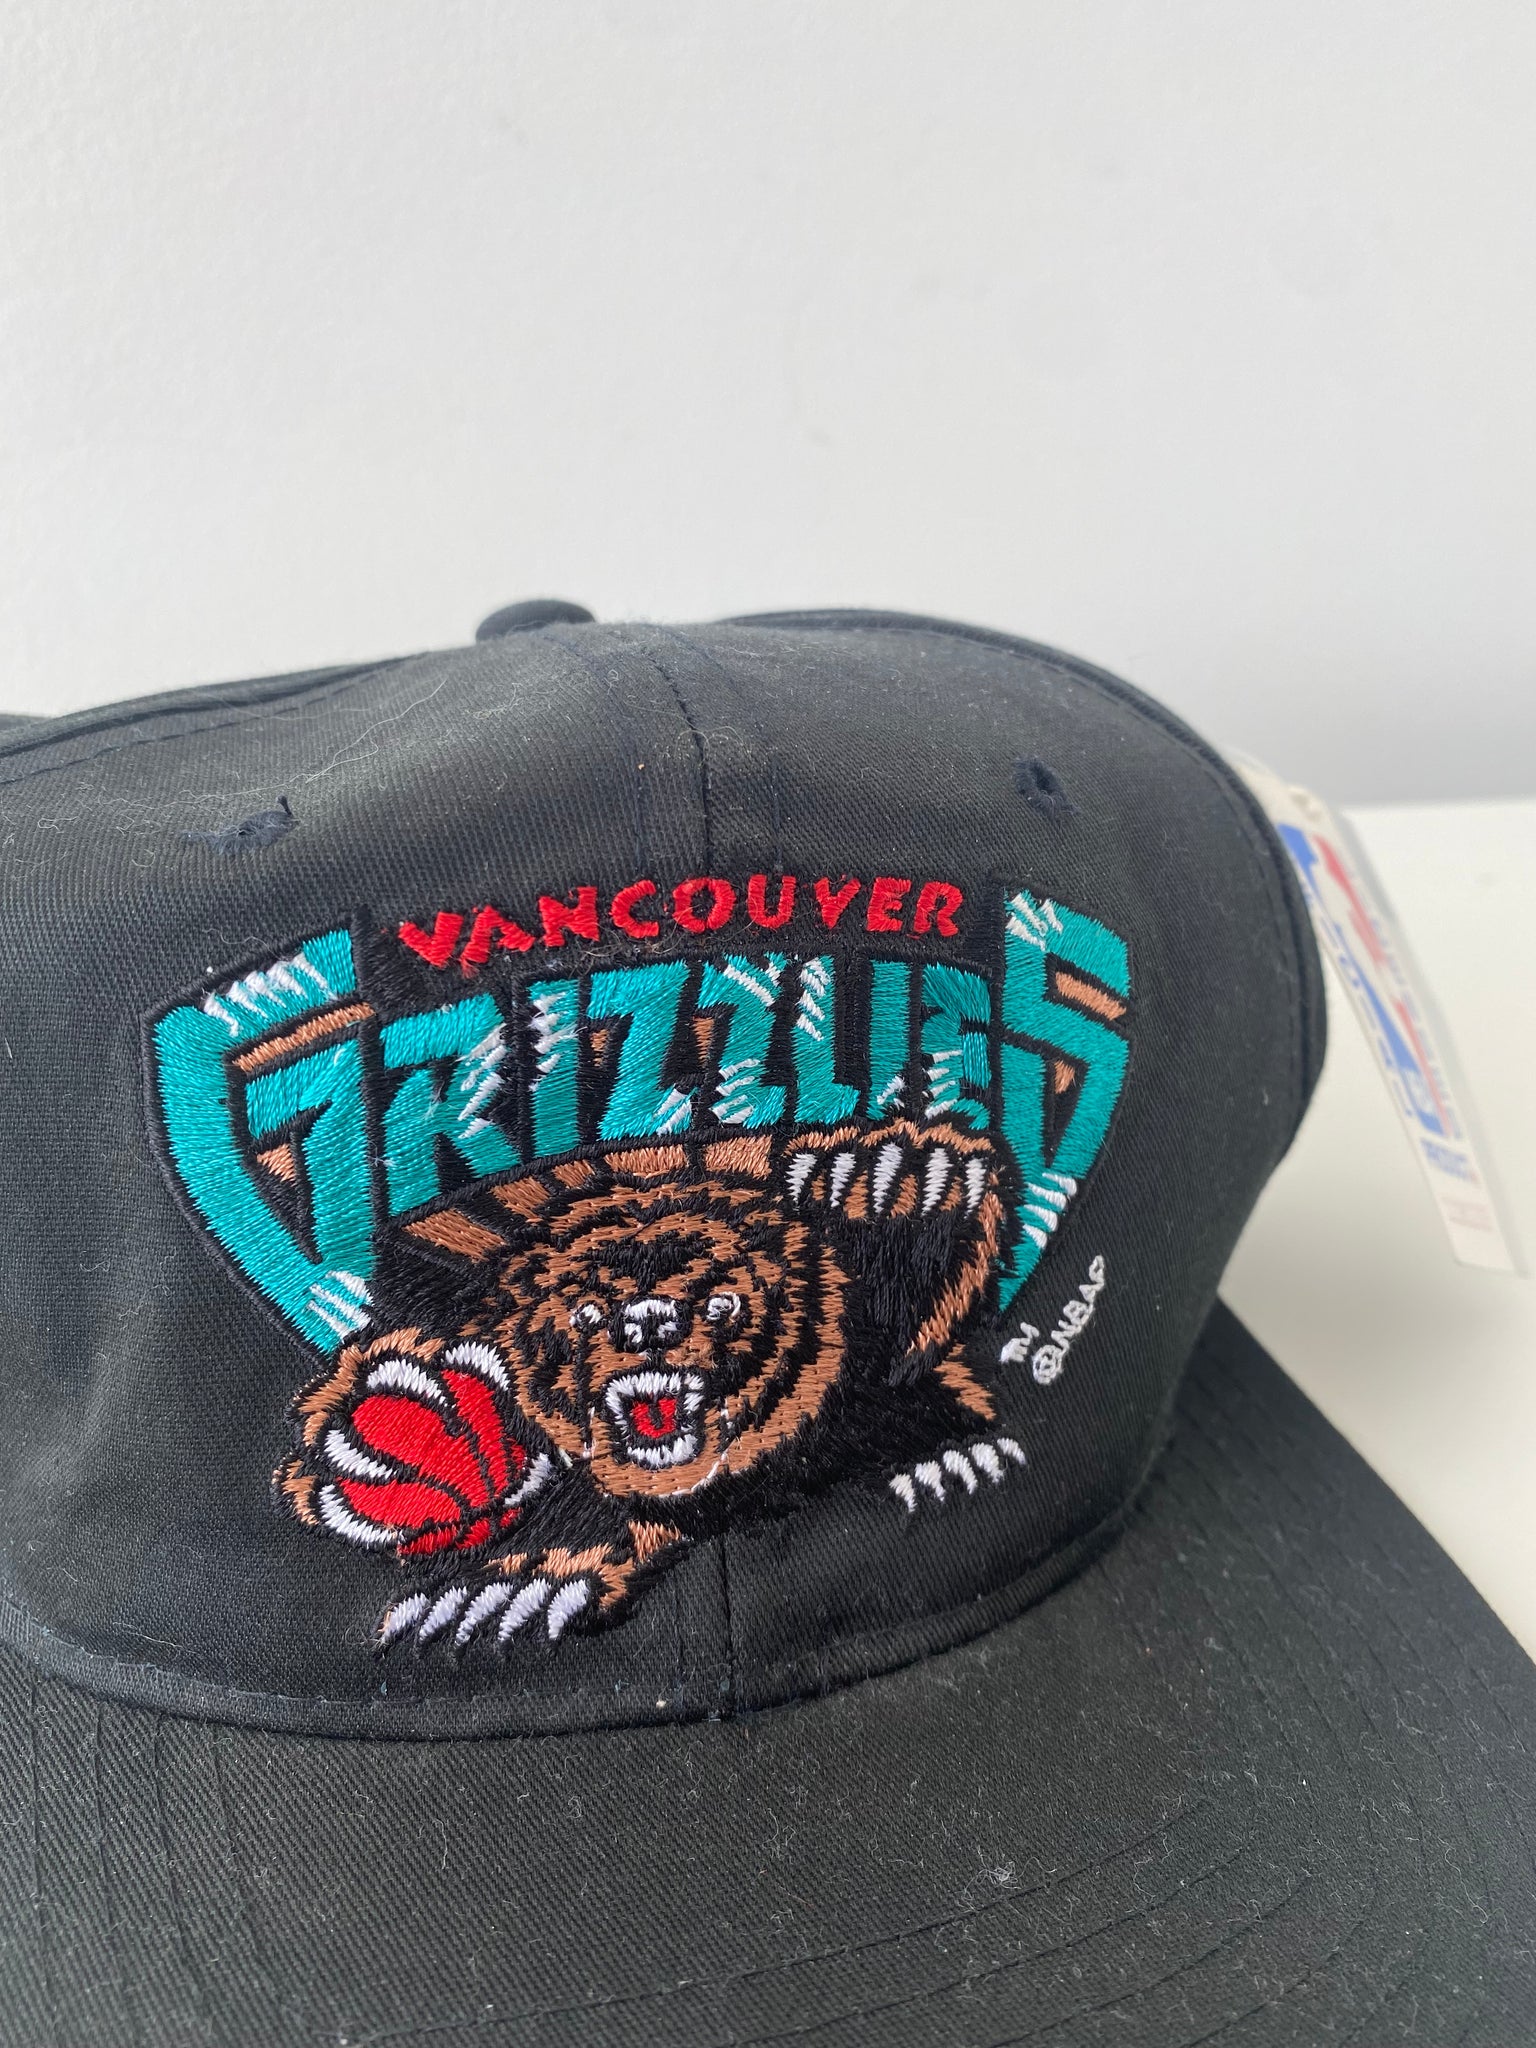 Vintage Vancouver Grizzles snapback by Starter